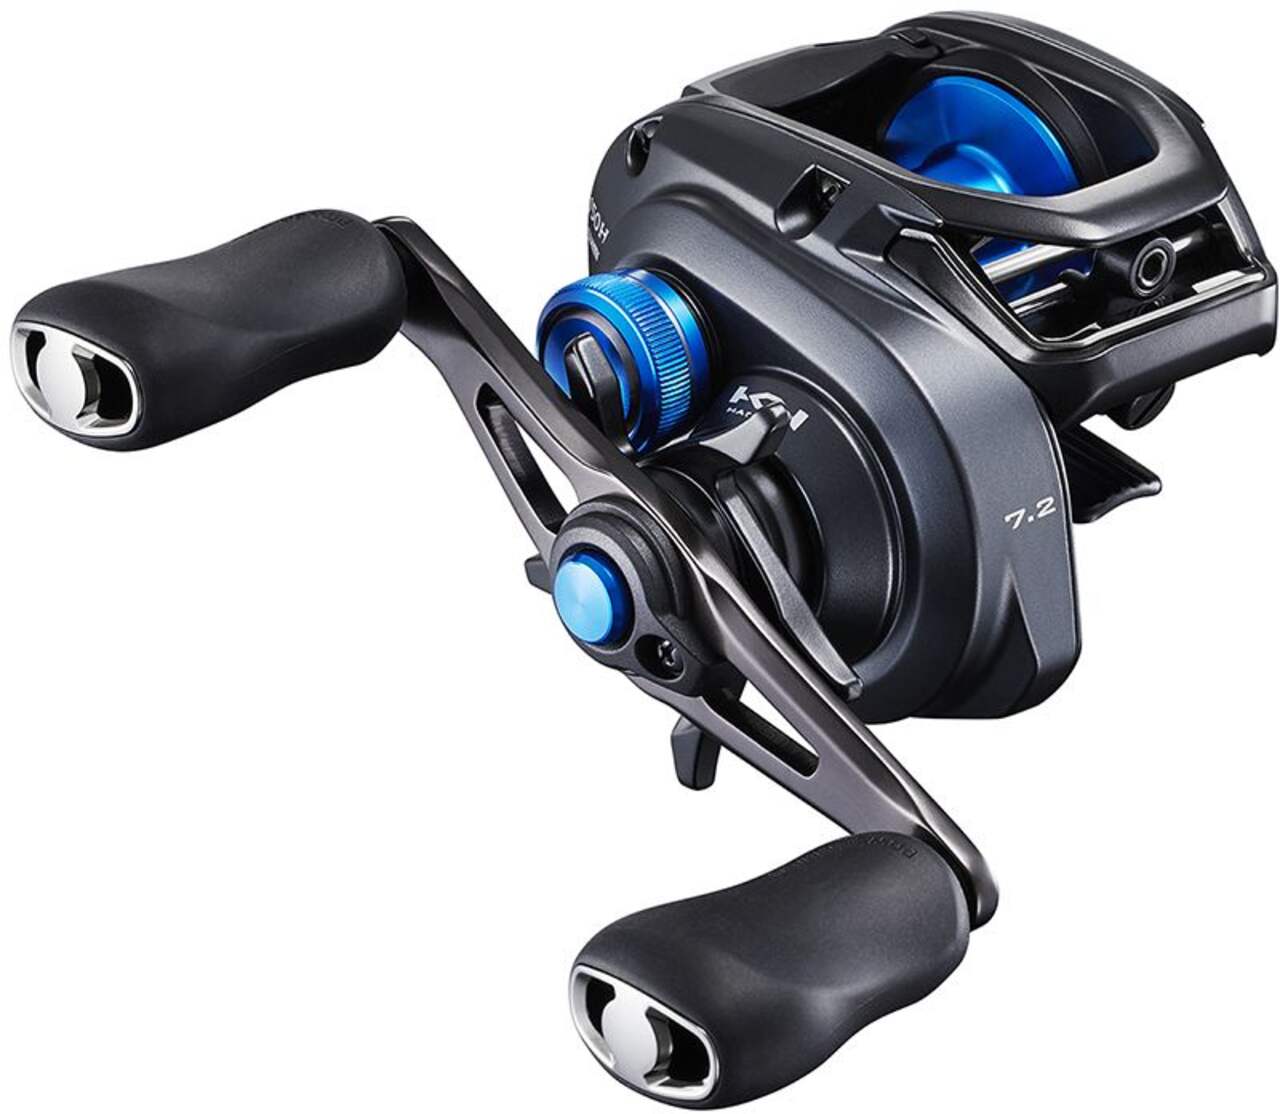 https://media-www.canadiantire.ca/product/playing/fishing/fishing-equipment/1784967/shimano-slx-xt-casting-reel-151-left-hand-07516a91-646d-4945-a228-d540ac47afa0-jpgrendition.jpg?imdensity=1&imwidth=1244&impolicy=mZoom